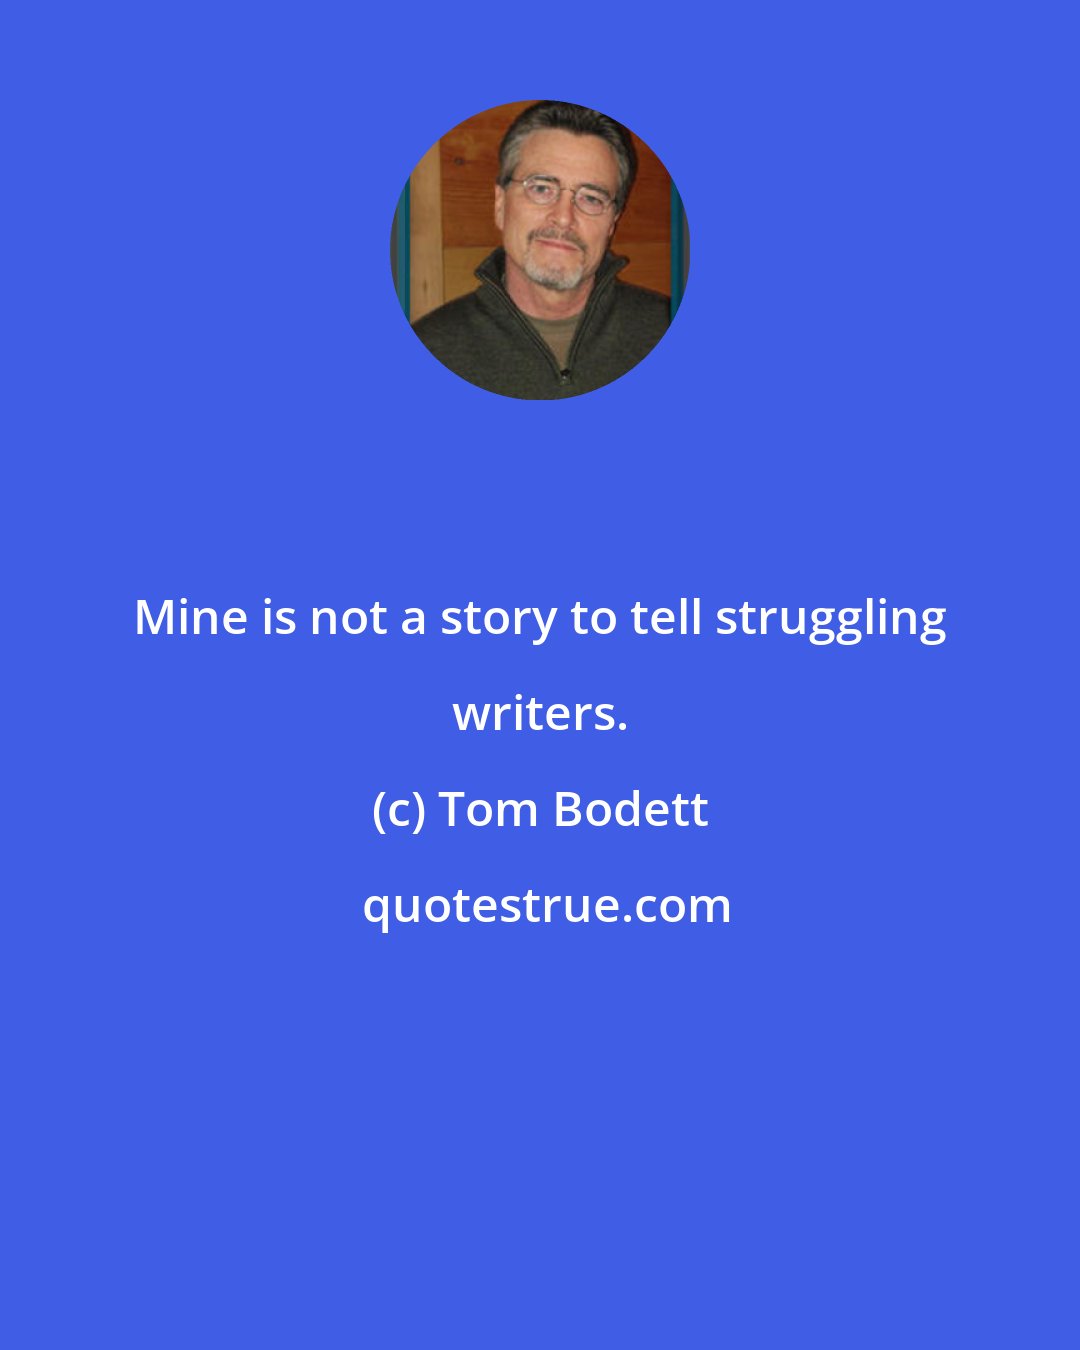 Tom Bodett: Mine is not a story to tell struggling writers.